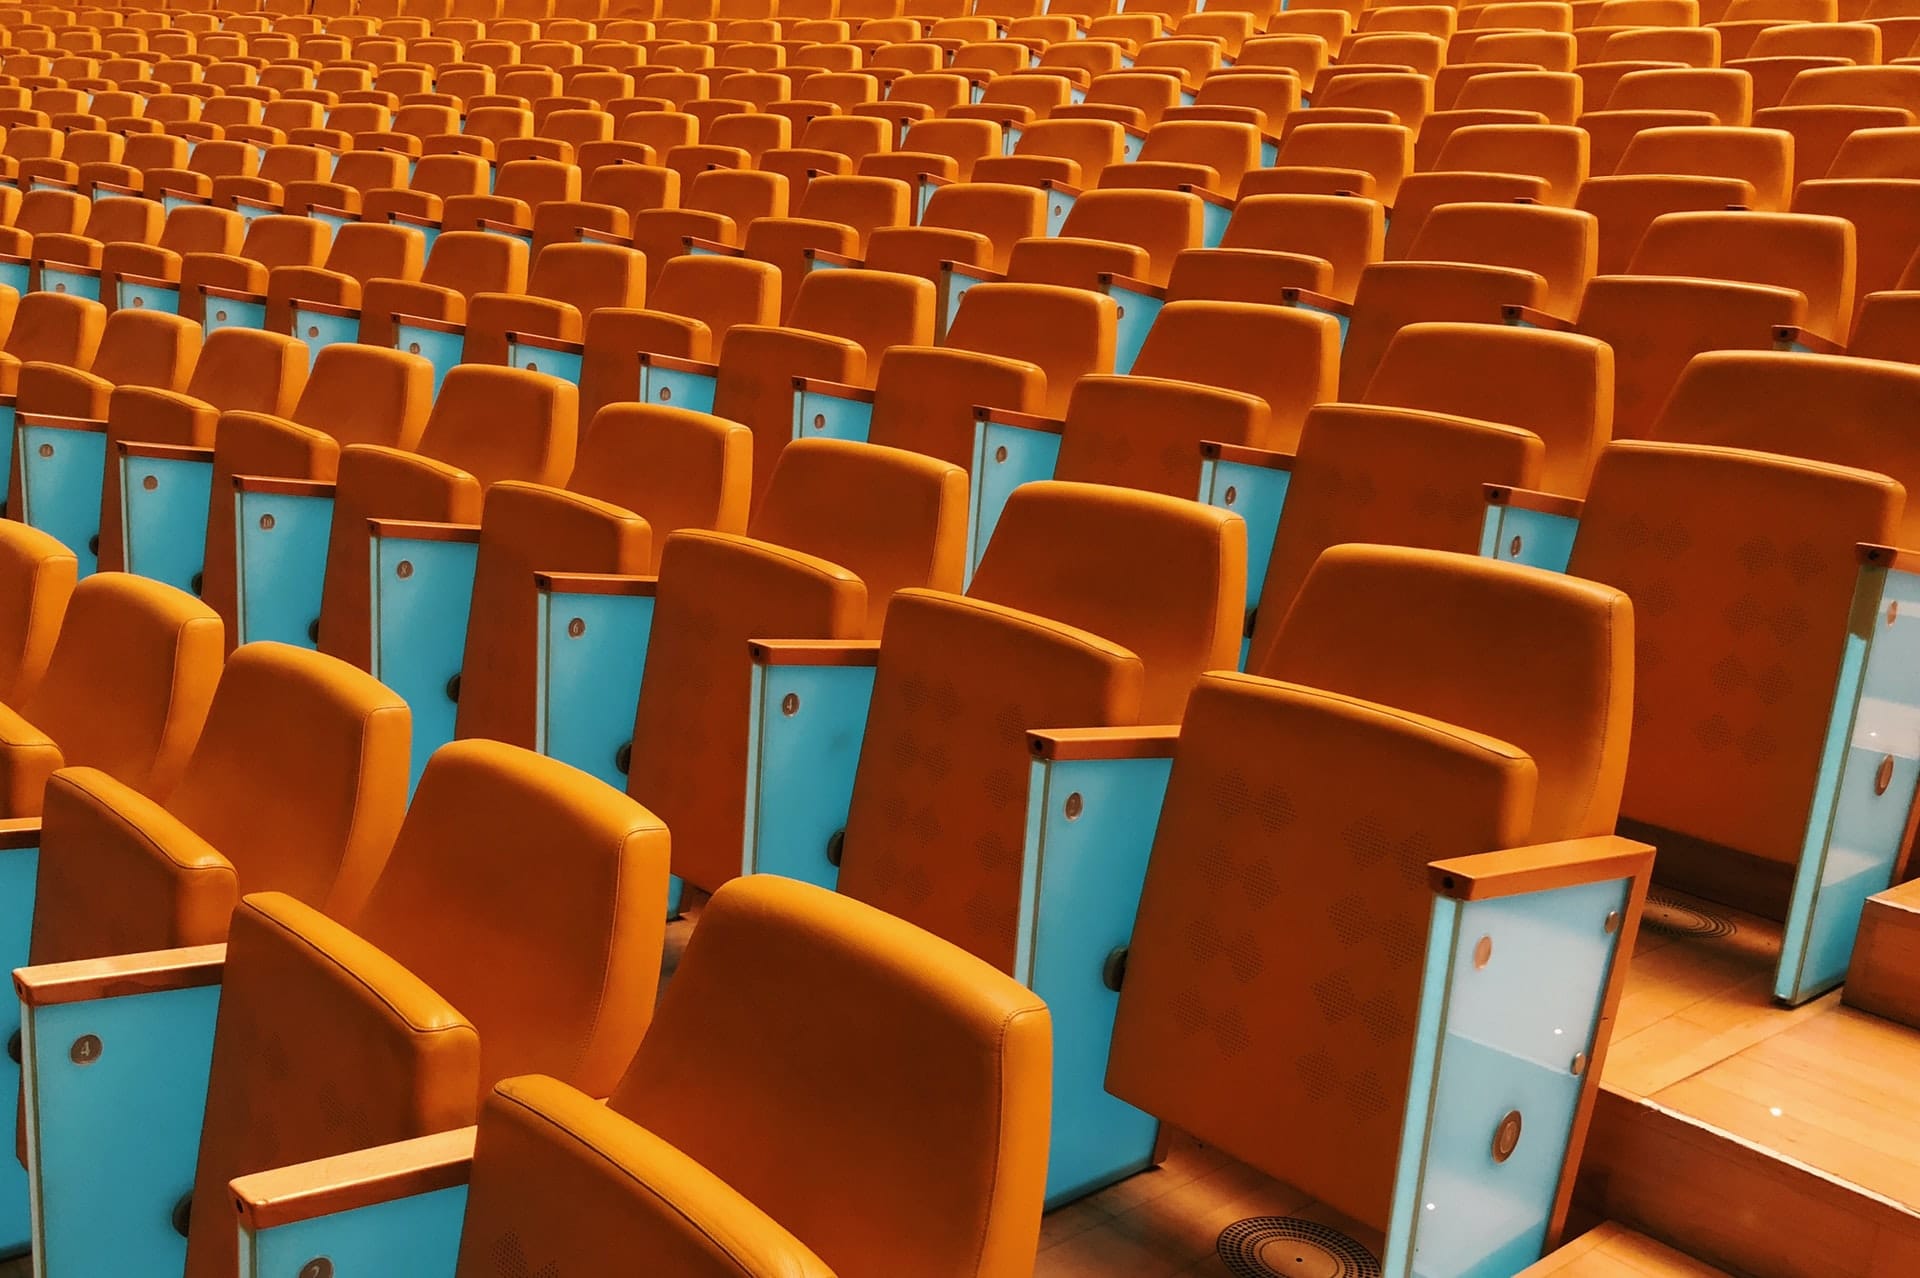 Photograph of empty seats in a conference hall